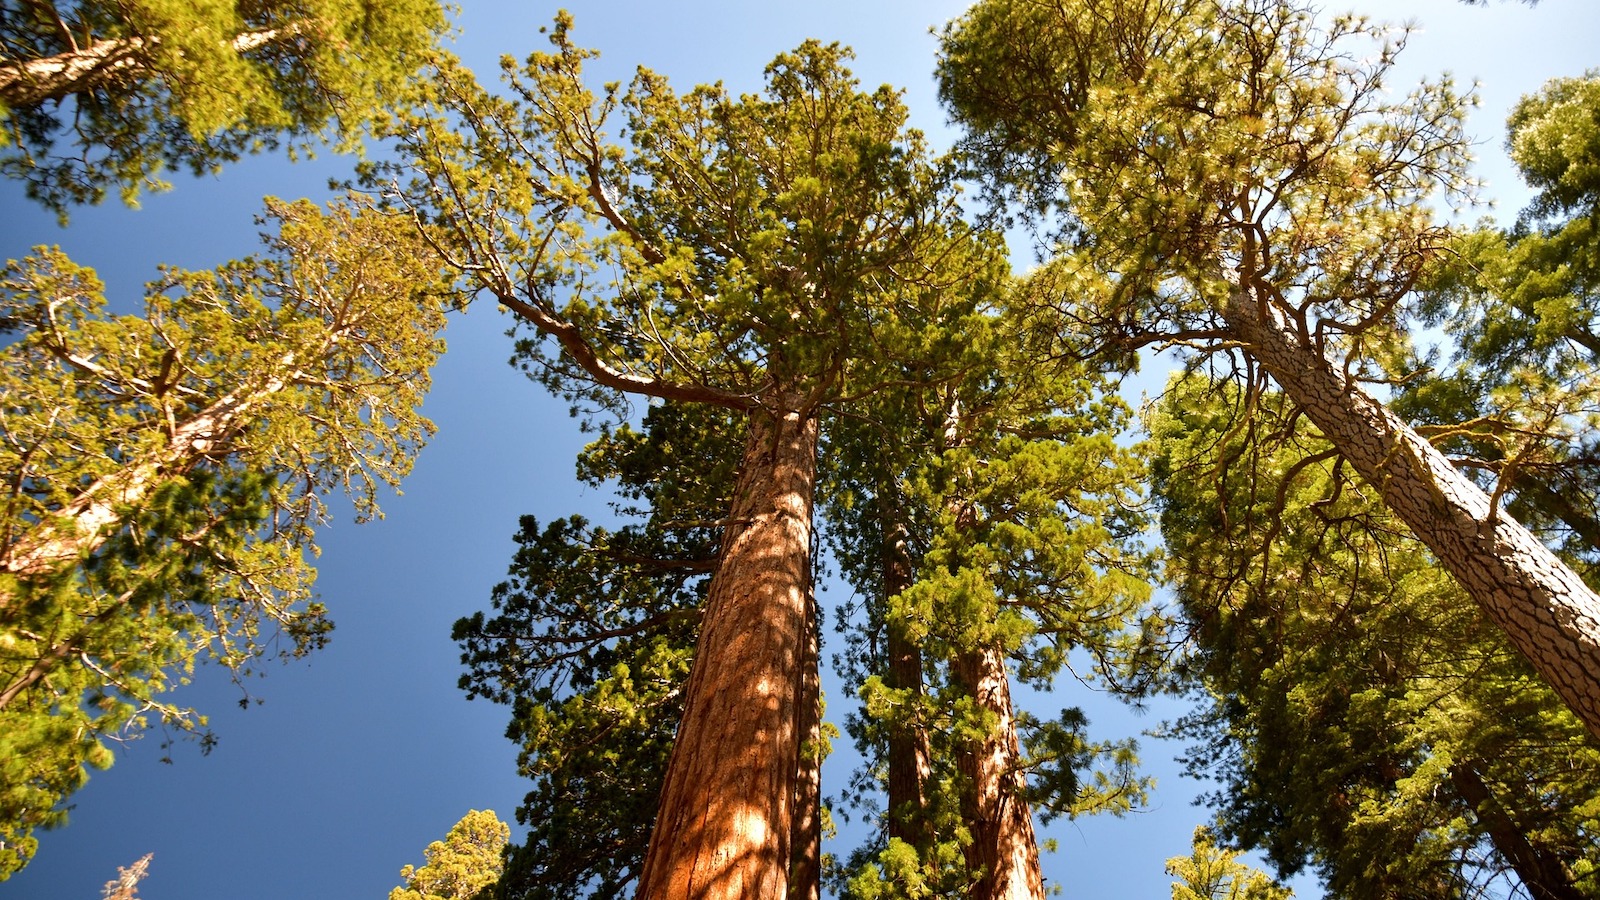 Tall sequoia trees stand against a blue sky